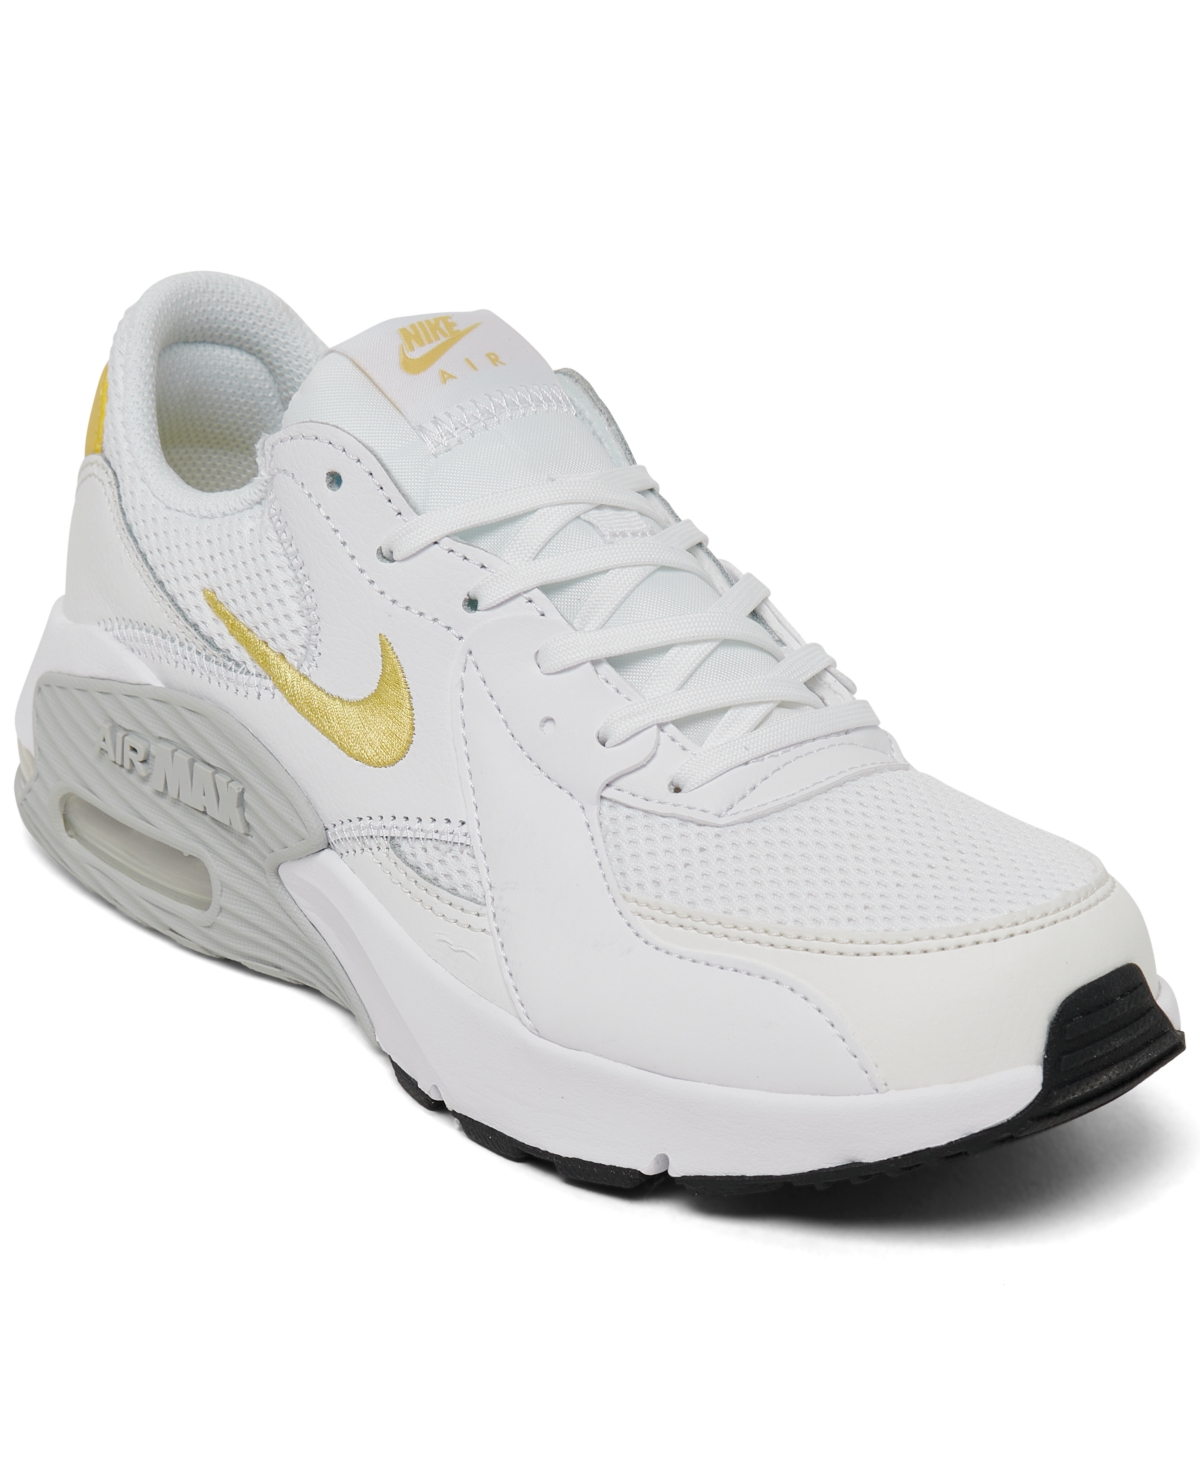 Women's Air Max Excee Casual Sneakers from Finish Line - White, Summit White, Black